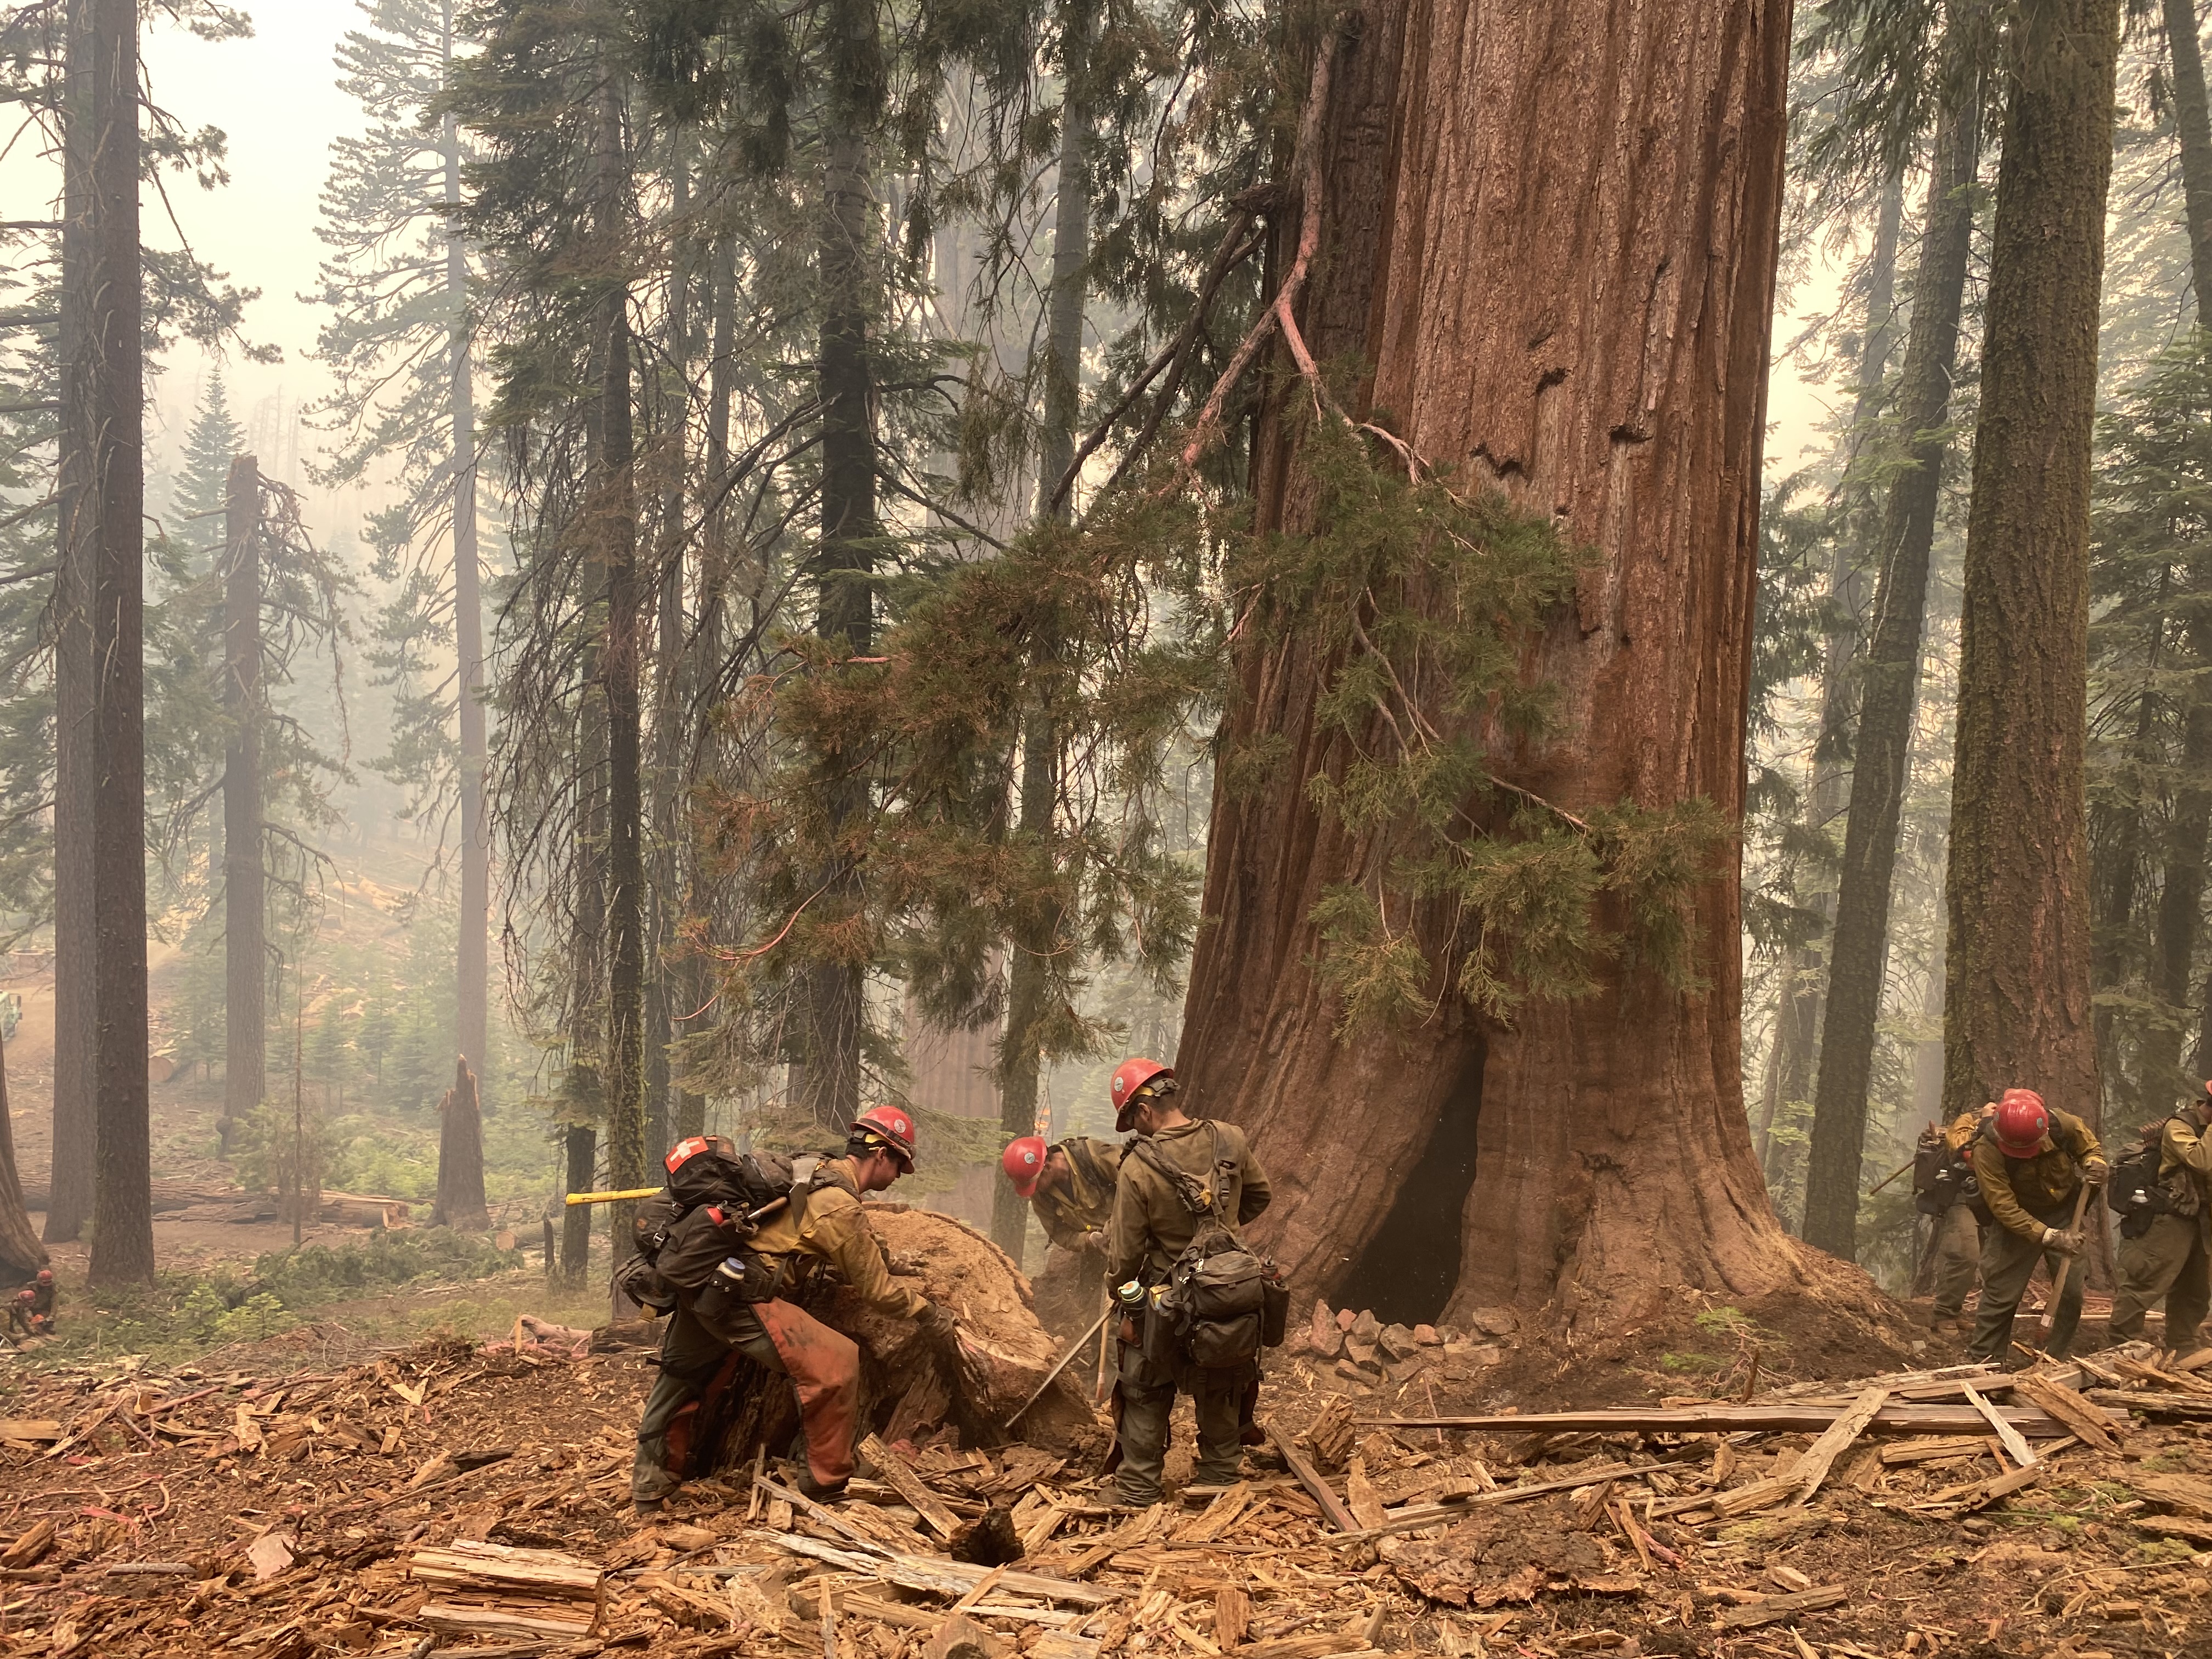 Firefighters in red helmets work to clear woody debris, some of it large, away from the base of a giant sequoia amidst smoke and haze.